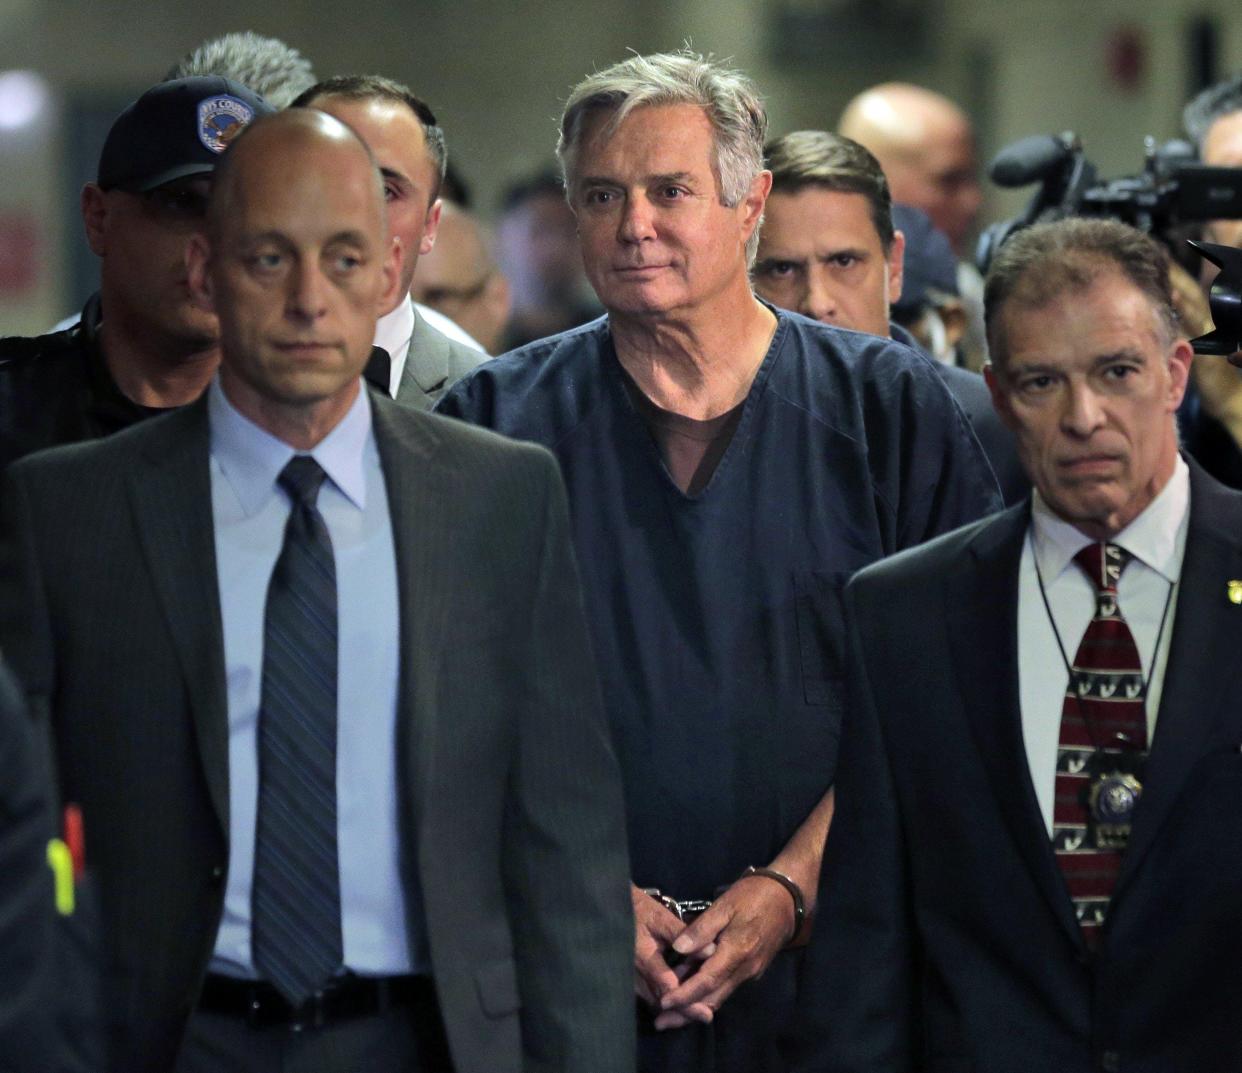 Paul Manafort arrives in court in New York in this June 27, 2019 file photo.